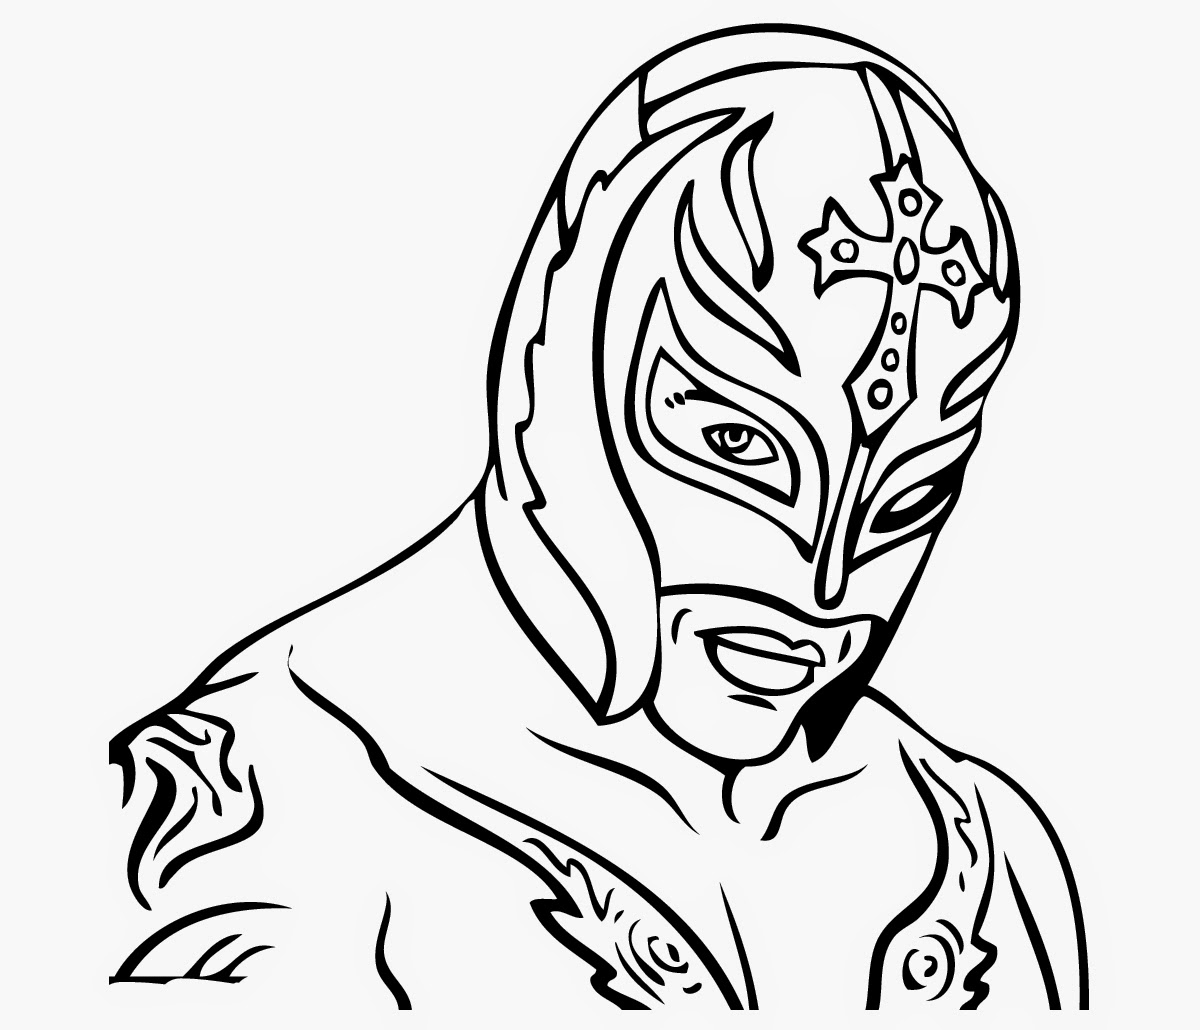 Wwe Kids Coloring Pages at GetDrawings Free download